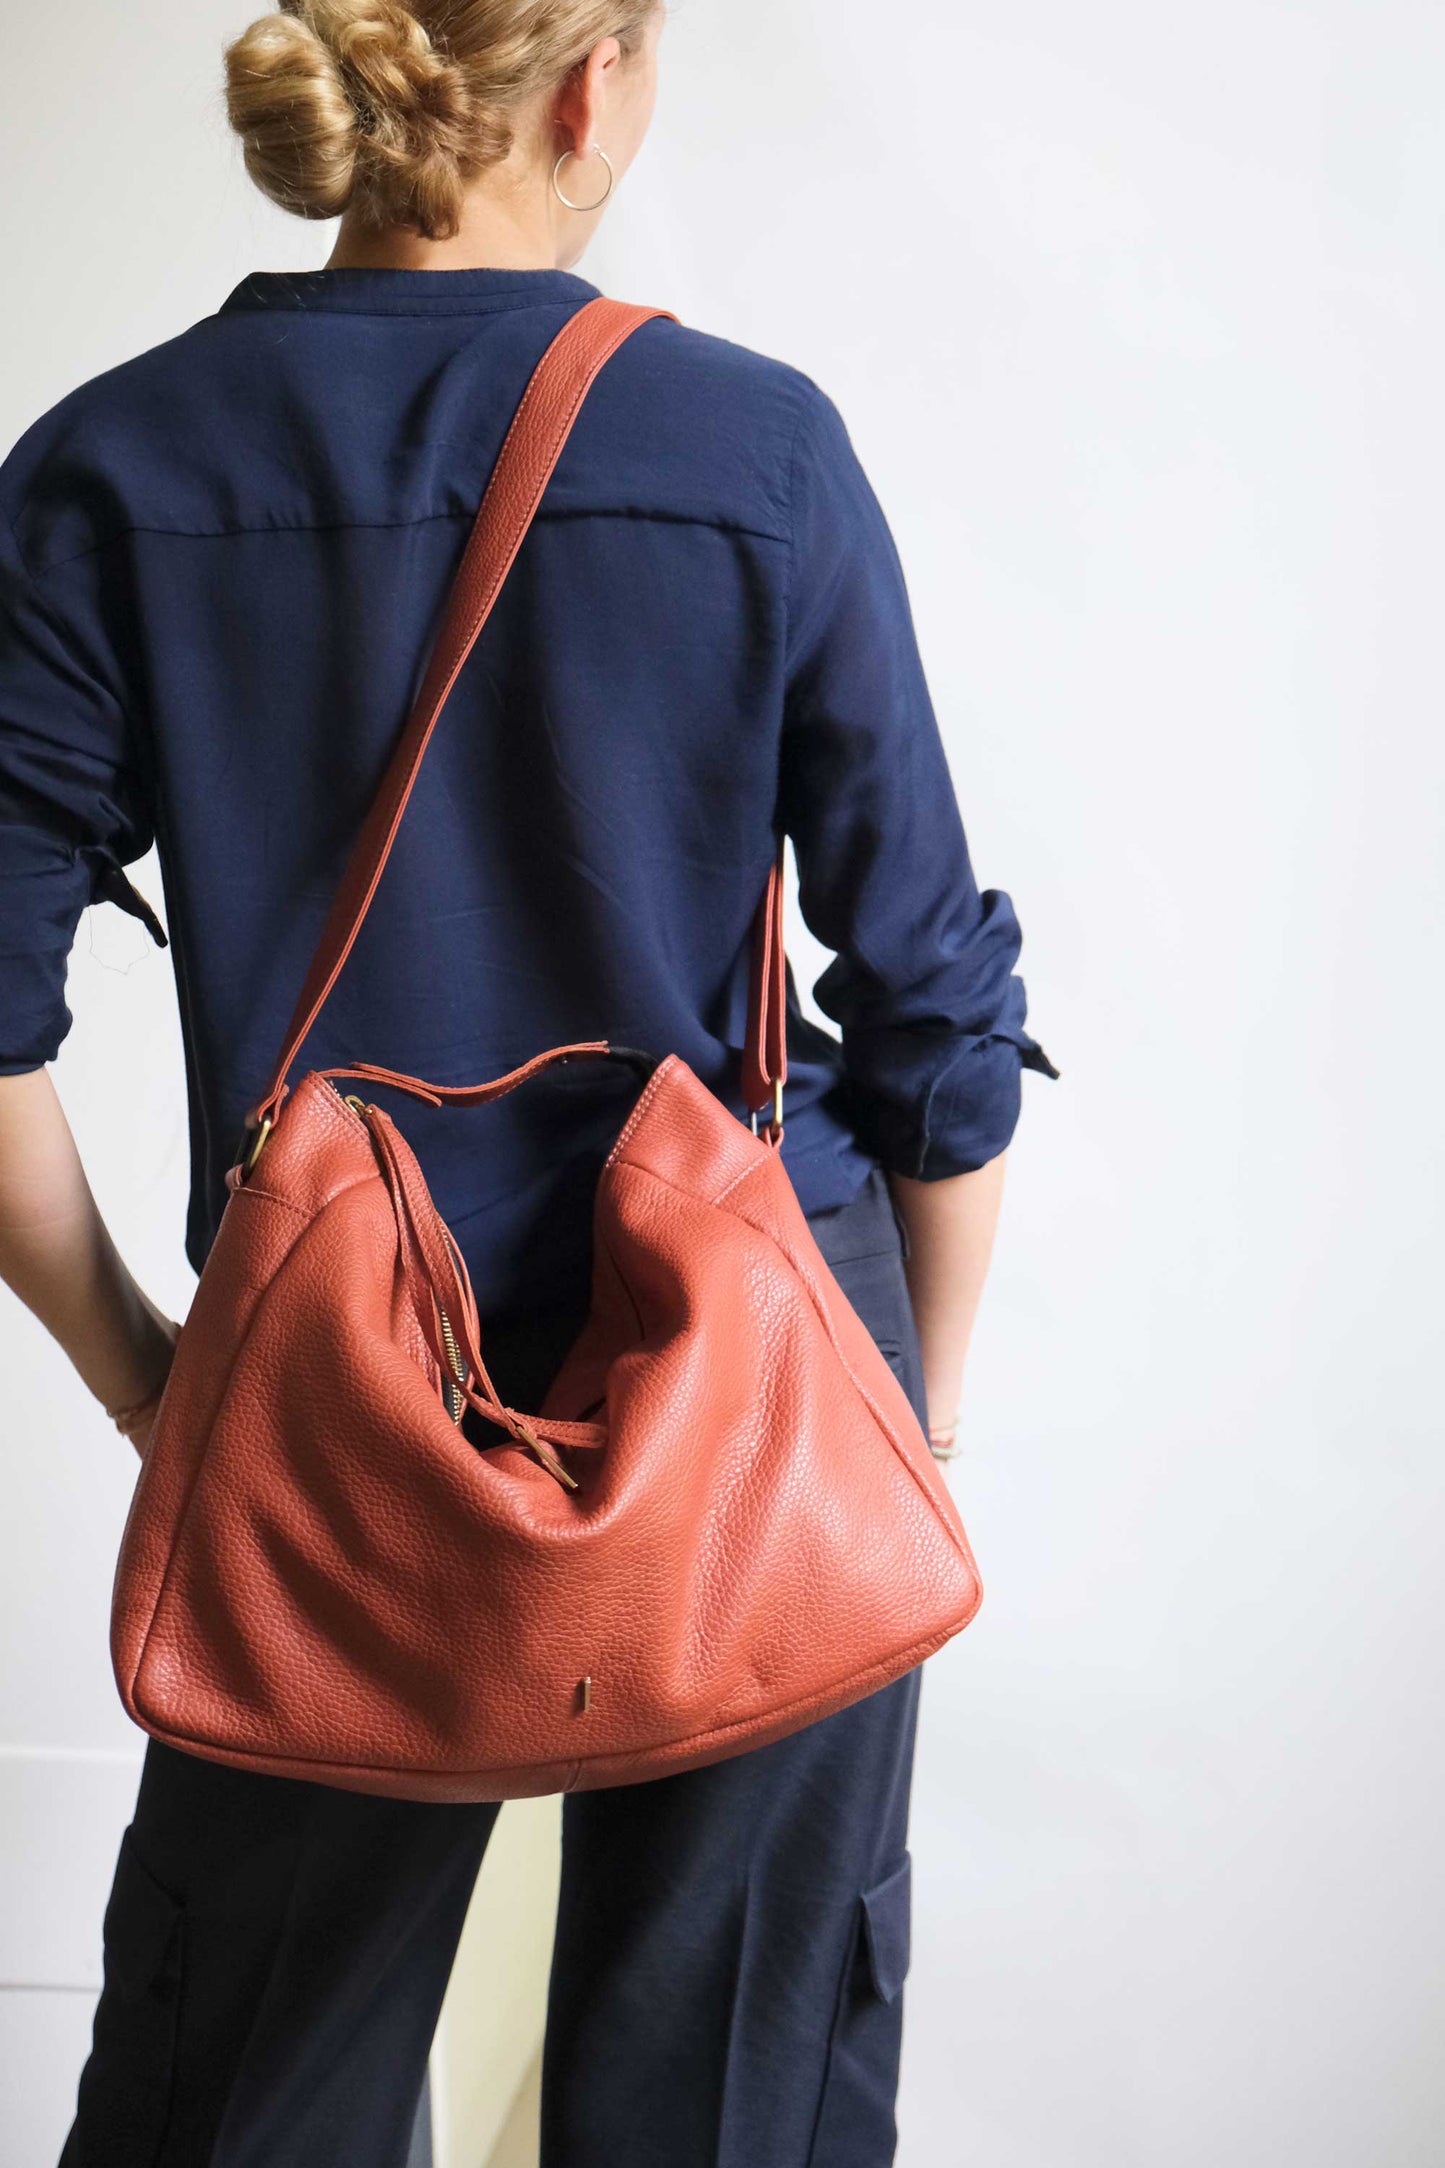 Chicca hobo bag in brick leather with natural grain